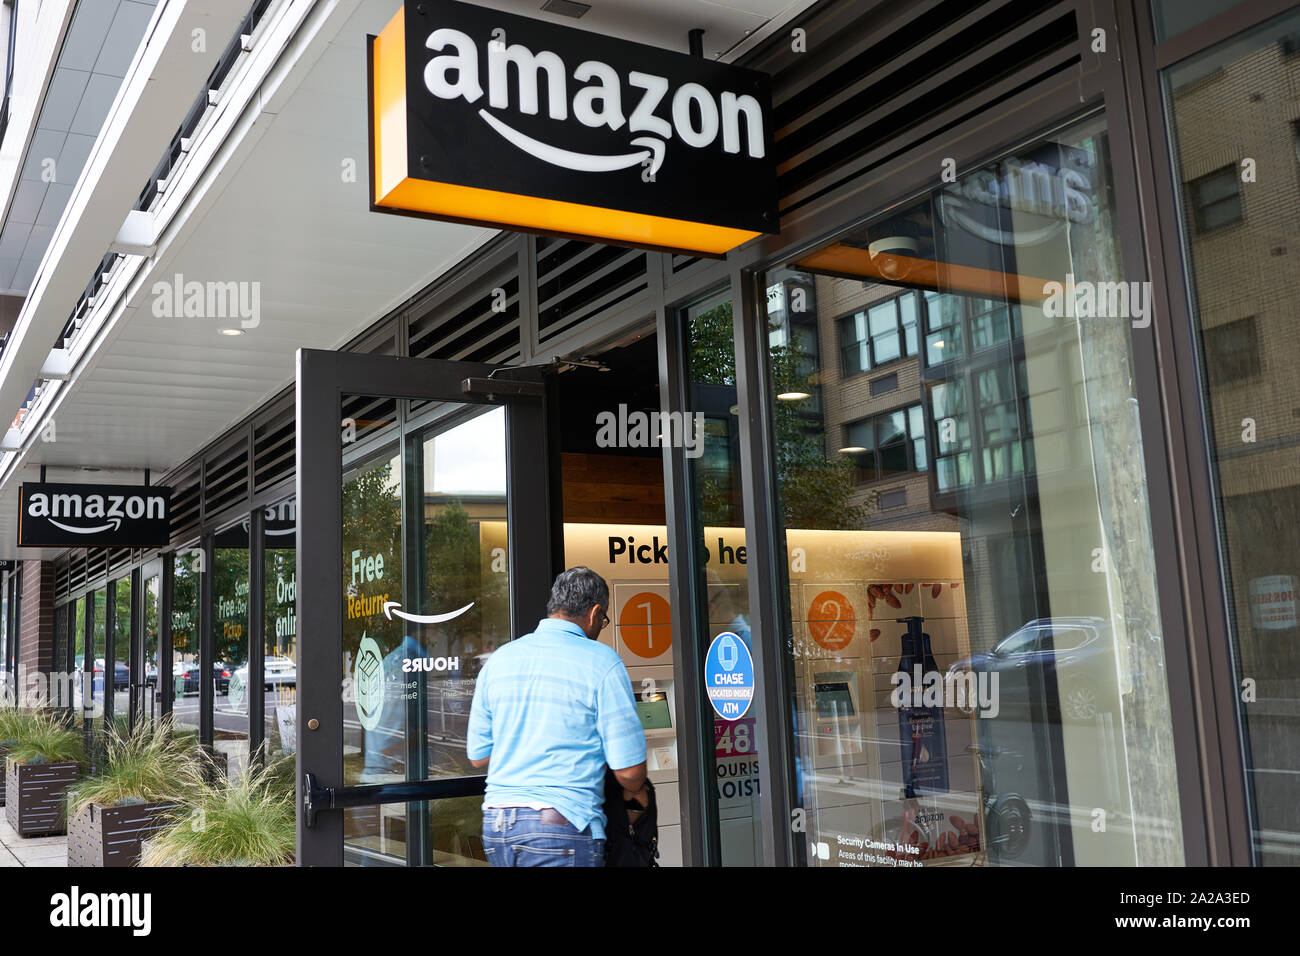 Portland, Oregon, USA - Sep 13, 2019: A man enters an Amazon Hub Locker location, a self-service delivery place to pick up and return Amazon packages. Stock Photo